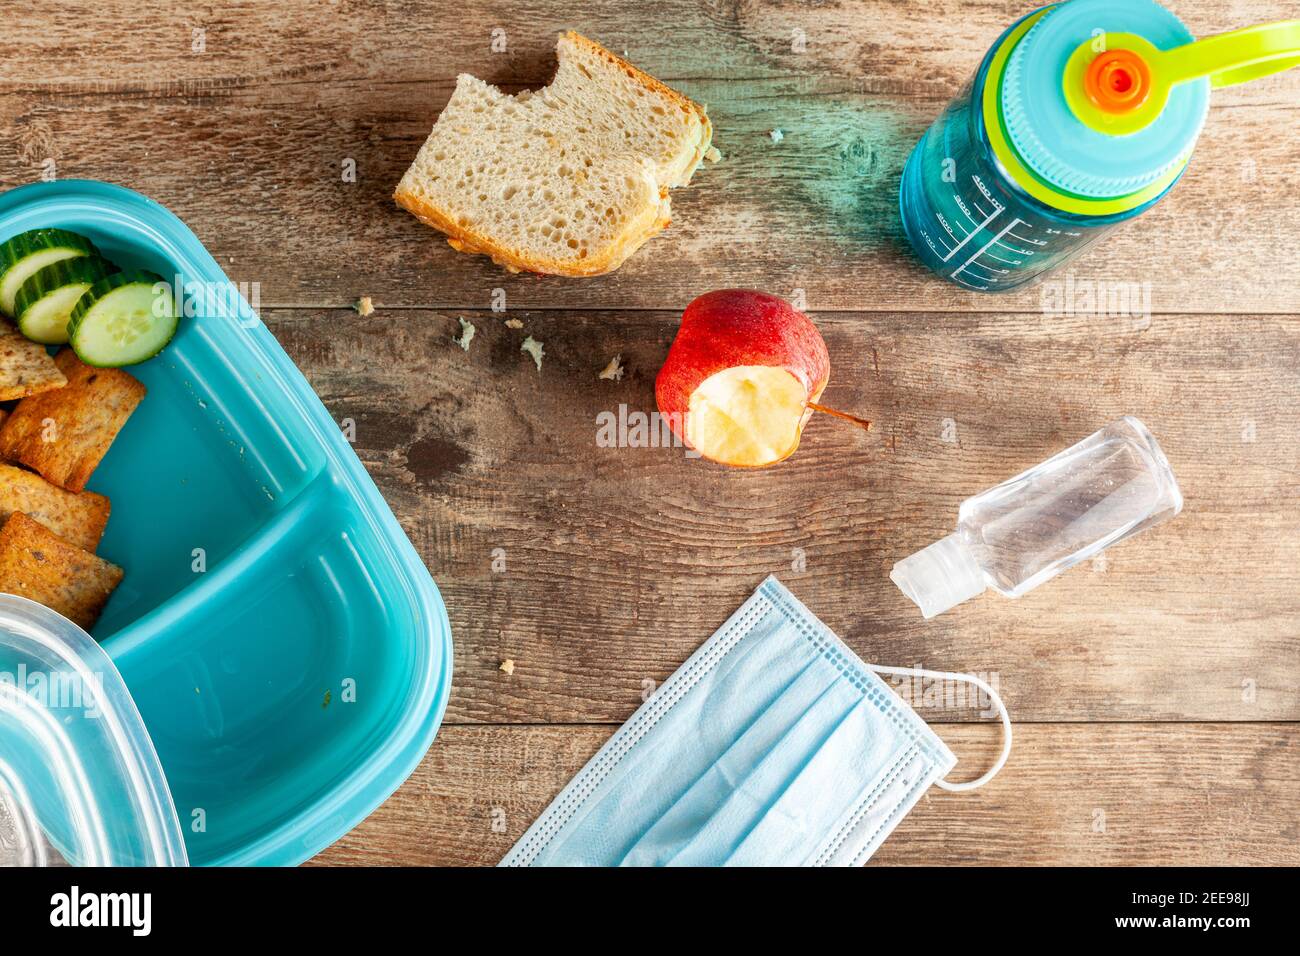 Flat lay image with eating lunch at school concept during the phased reopening after COVID-19 pandemic closures. Snack in containers as well as water Stock Photo